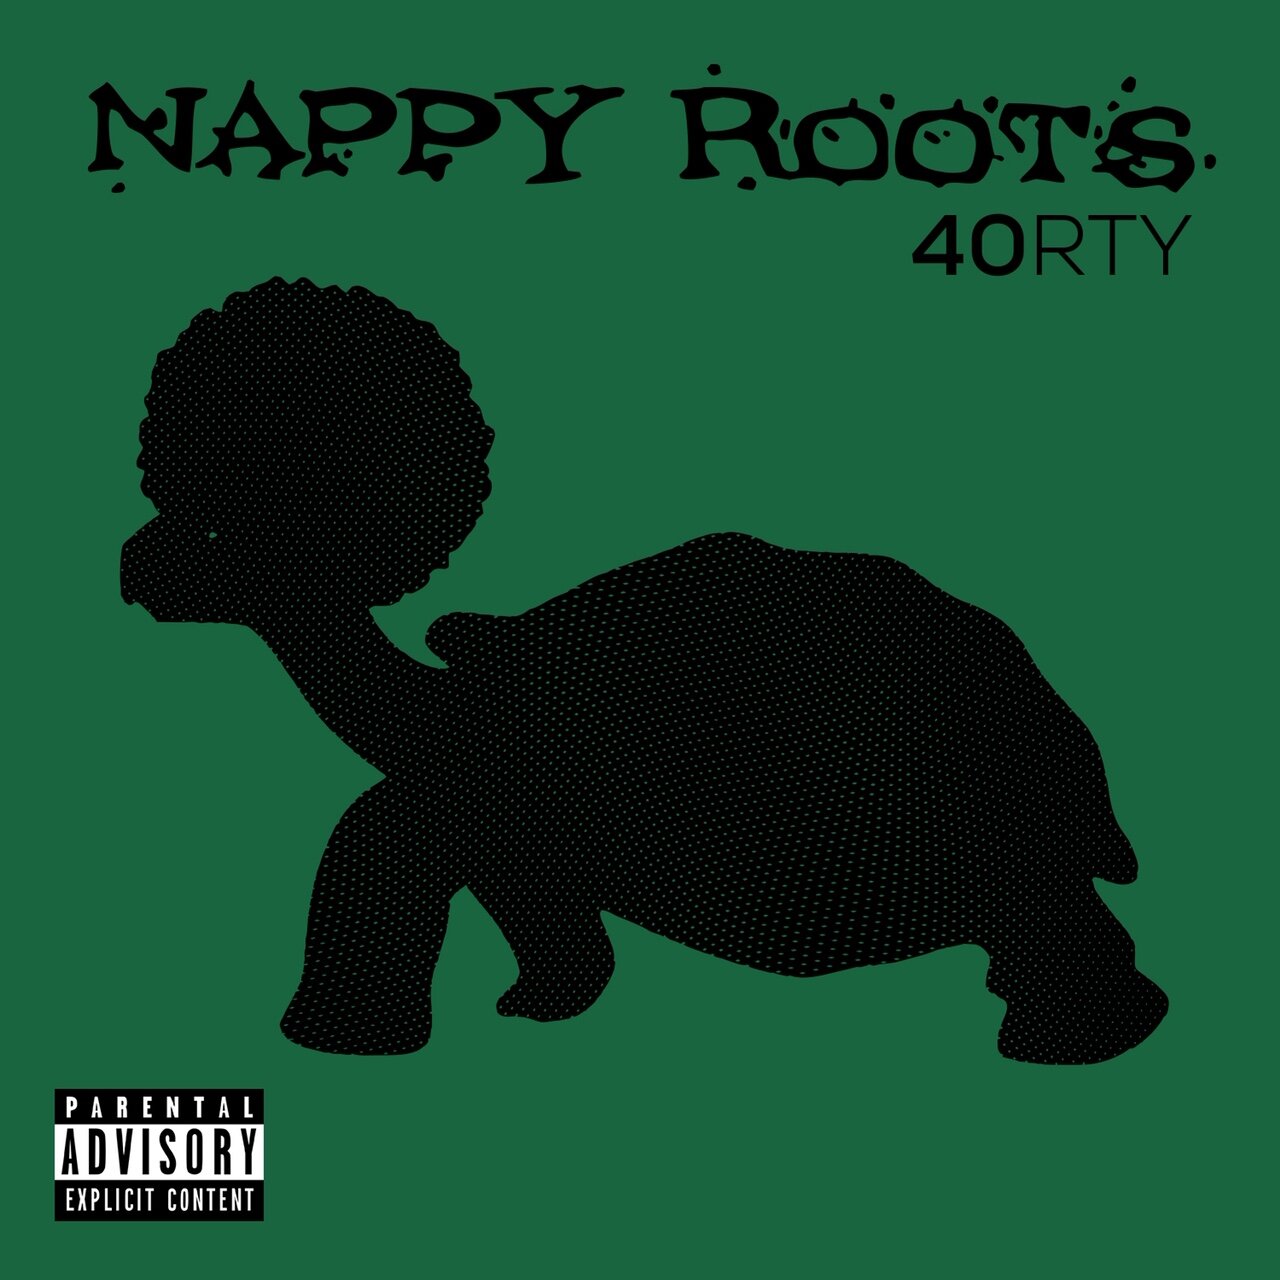 Nappy Roots "40rty"